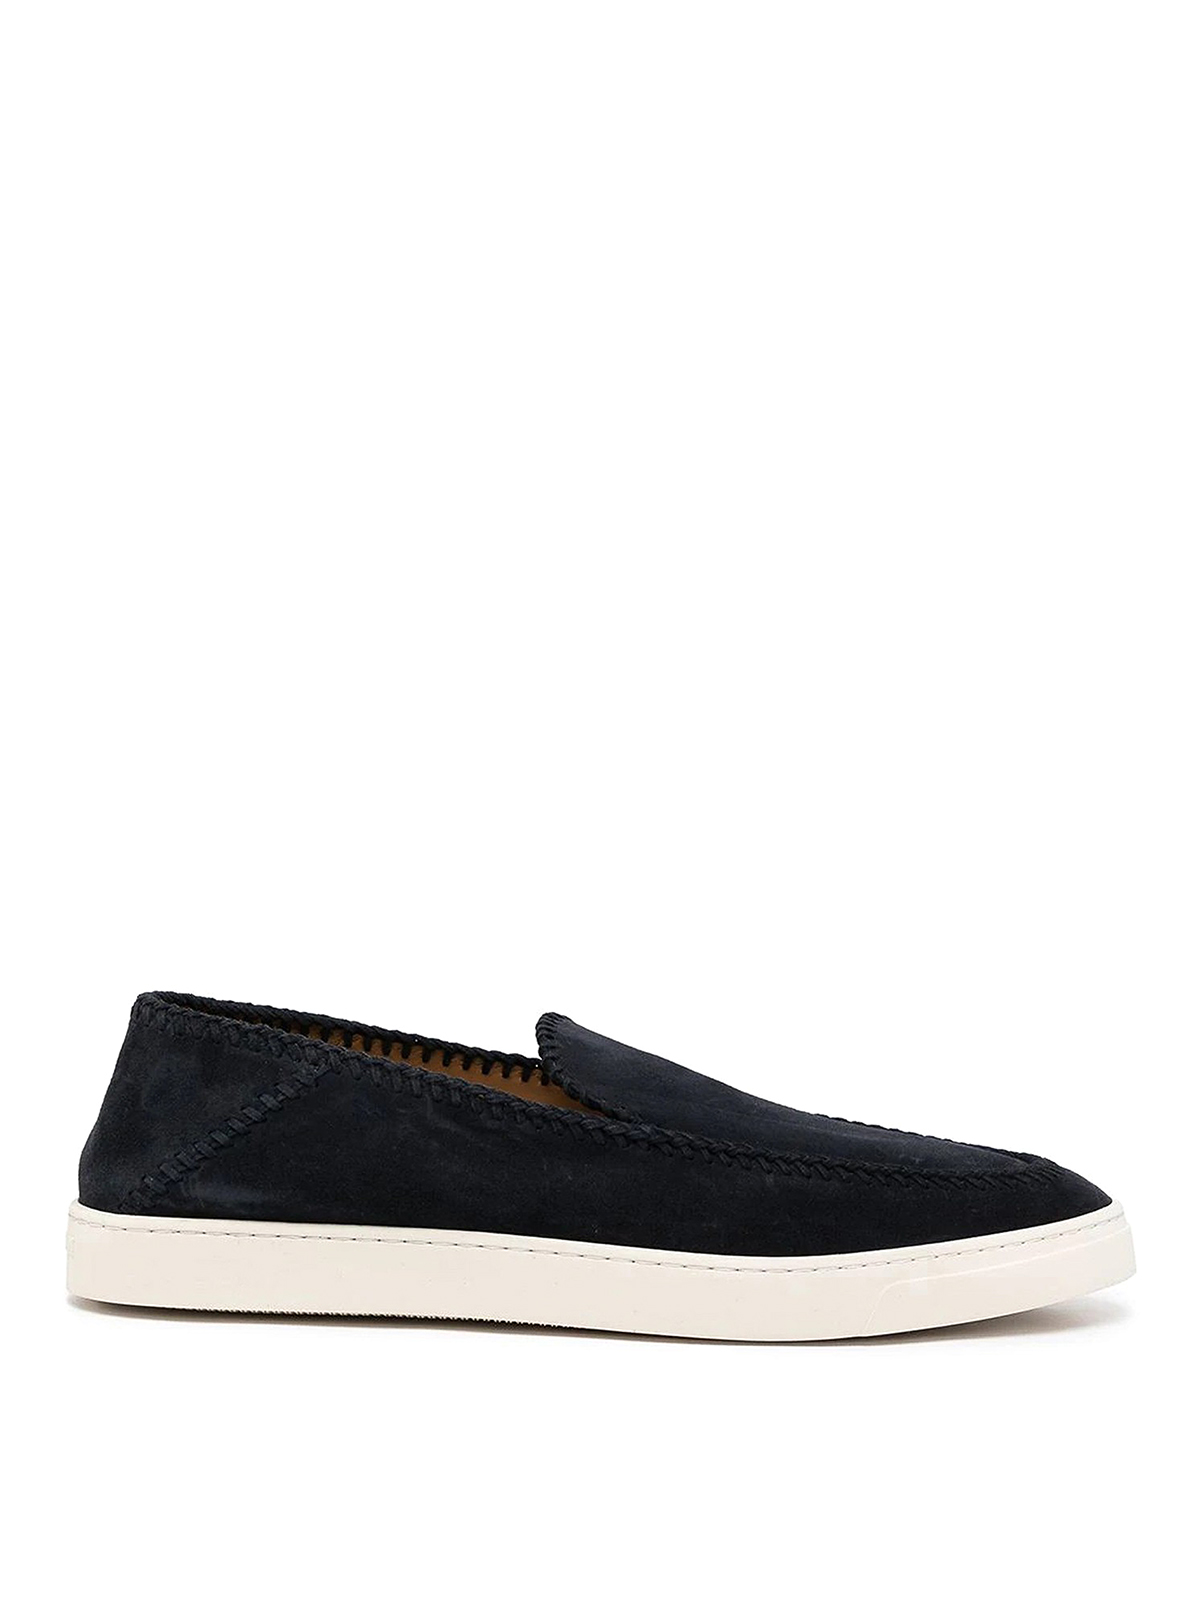 Giorgio Armani Suede Loafers With Embroidered Edging In Navy